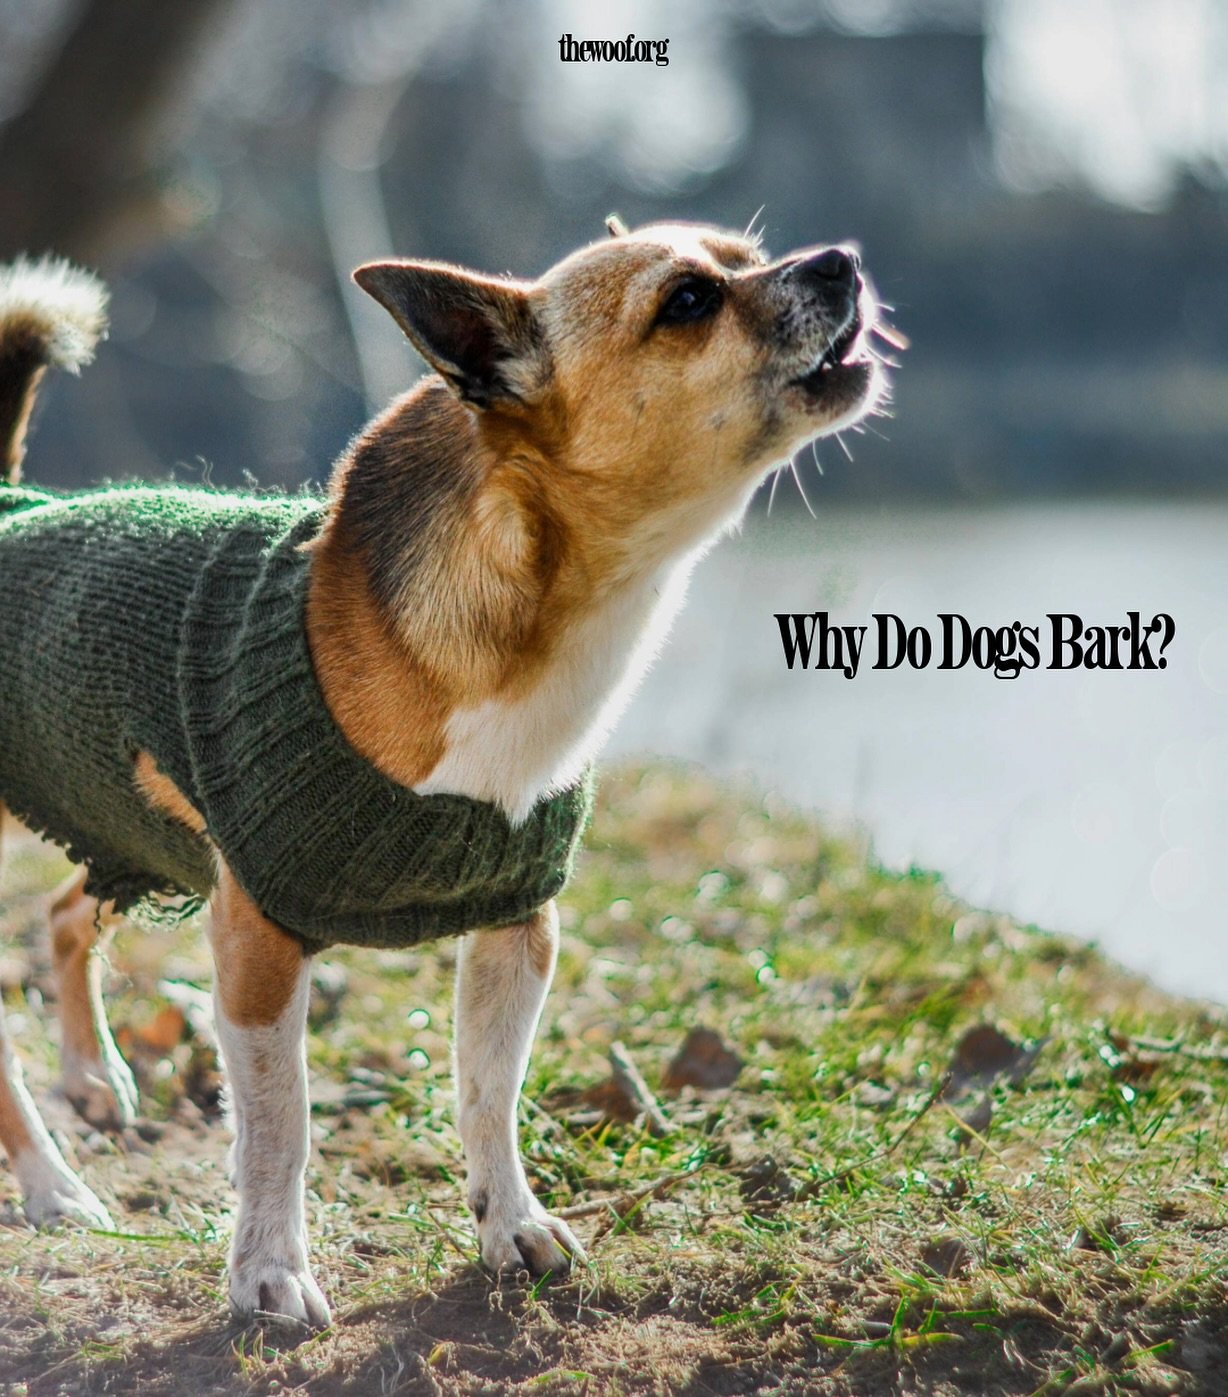 Did you know dog barking originates from wolves? Vocalization was essential in packs for communication like warning of threats, coordinating hunts, and establishing hierarchies. Learn more about why dogs bark on our website!🗣️🐾